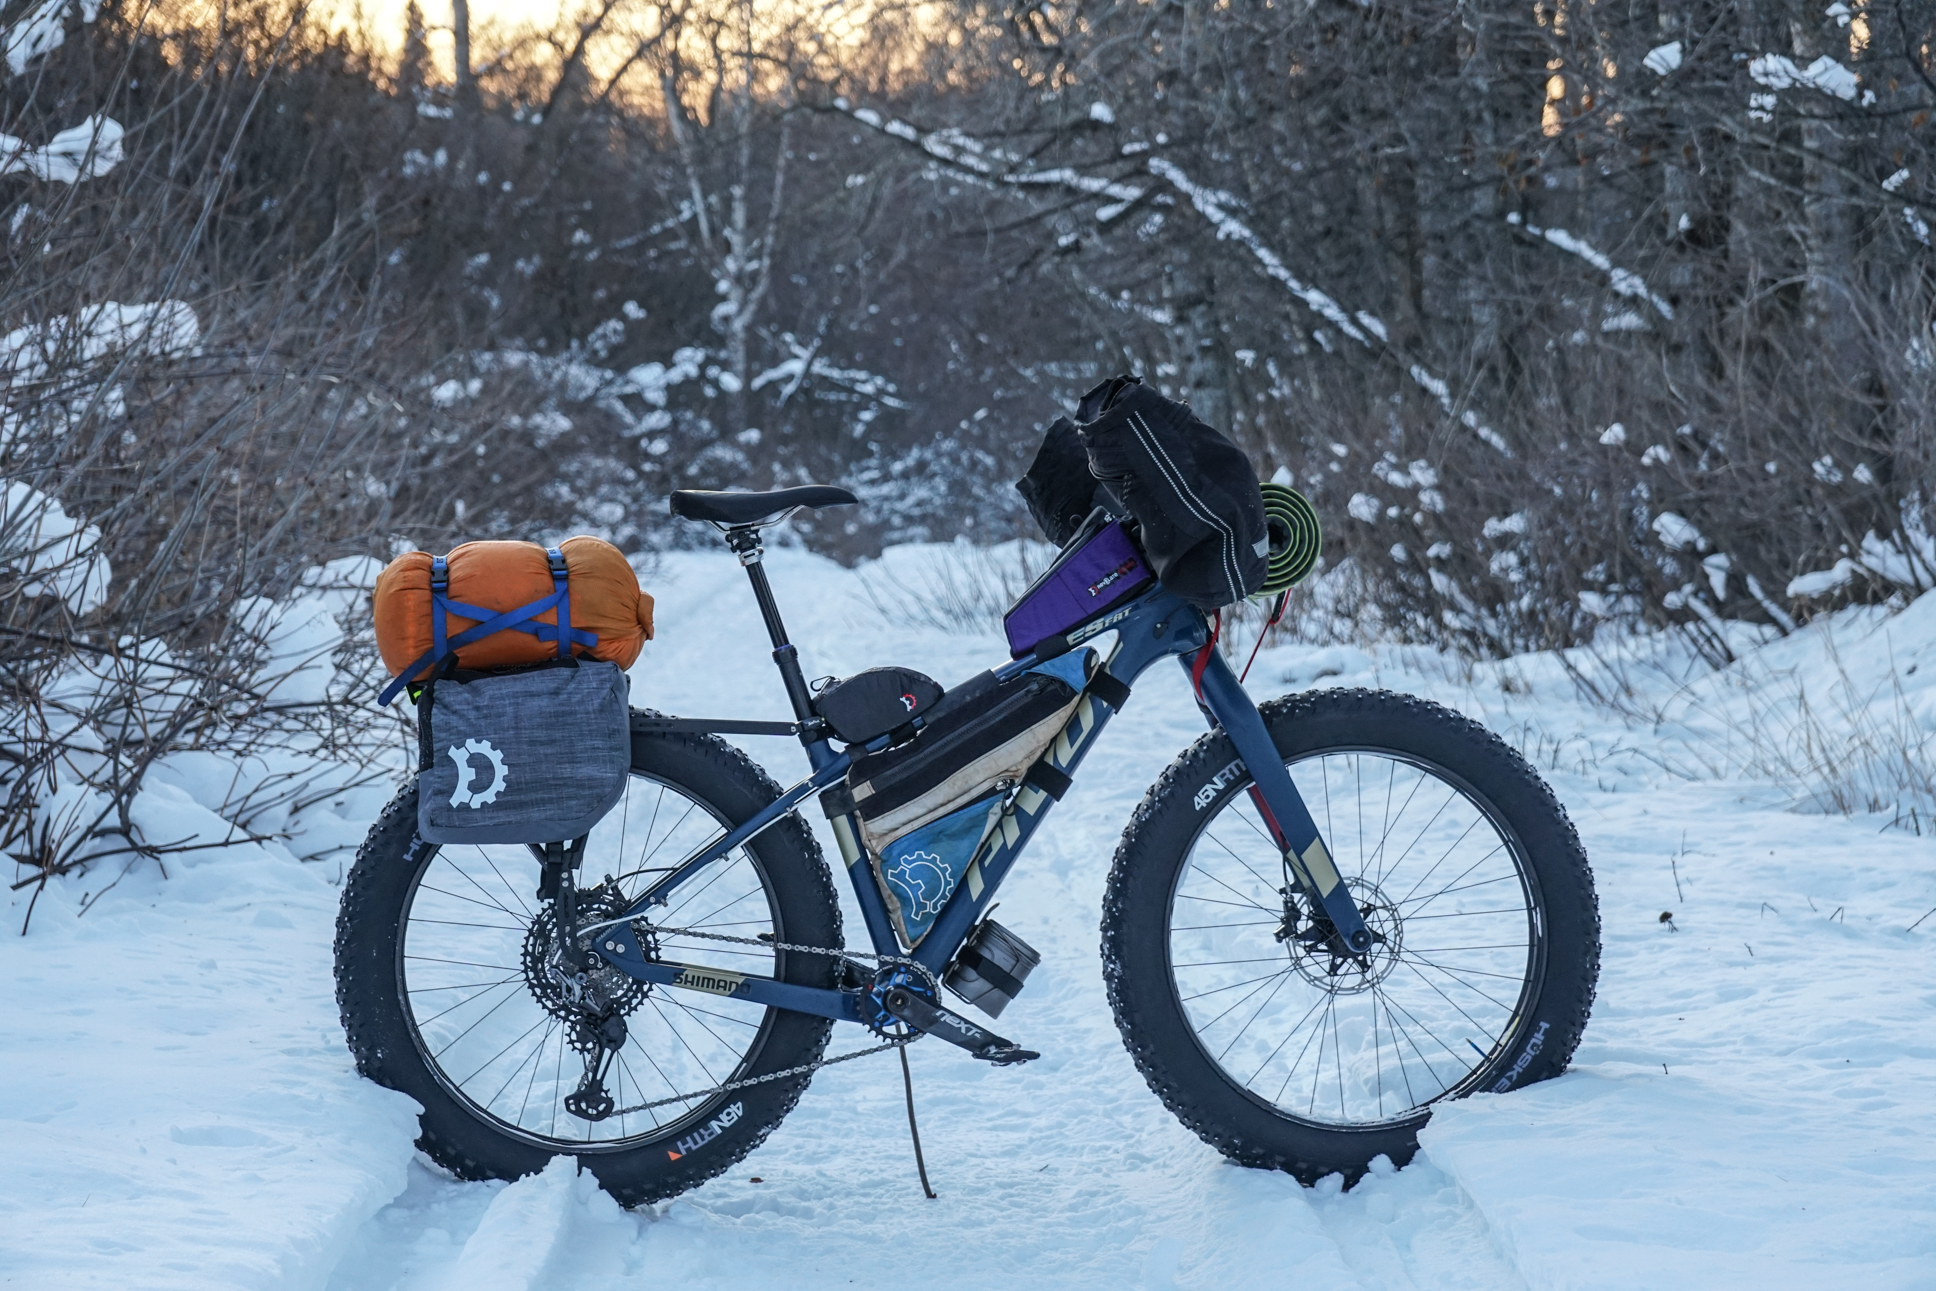 Kurt's bikepacking setup in the snow in Alaska with a Divide Fat rack